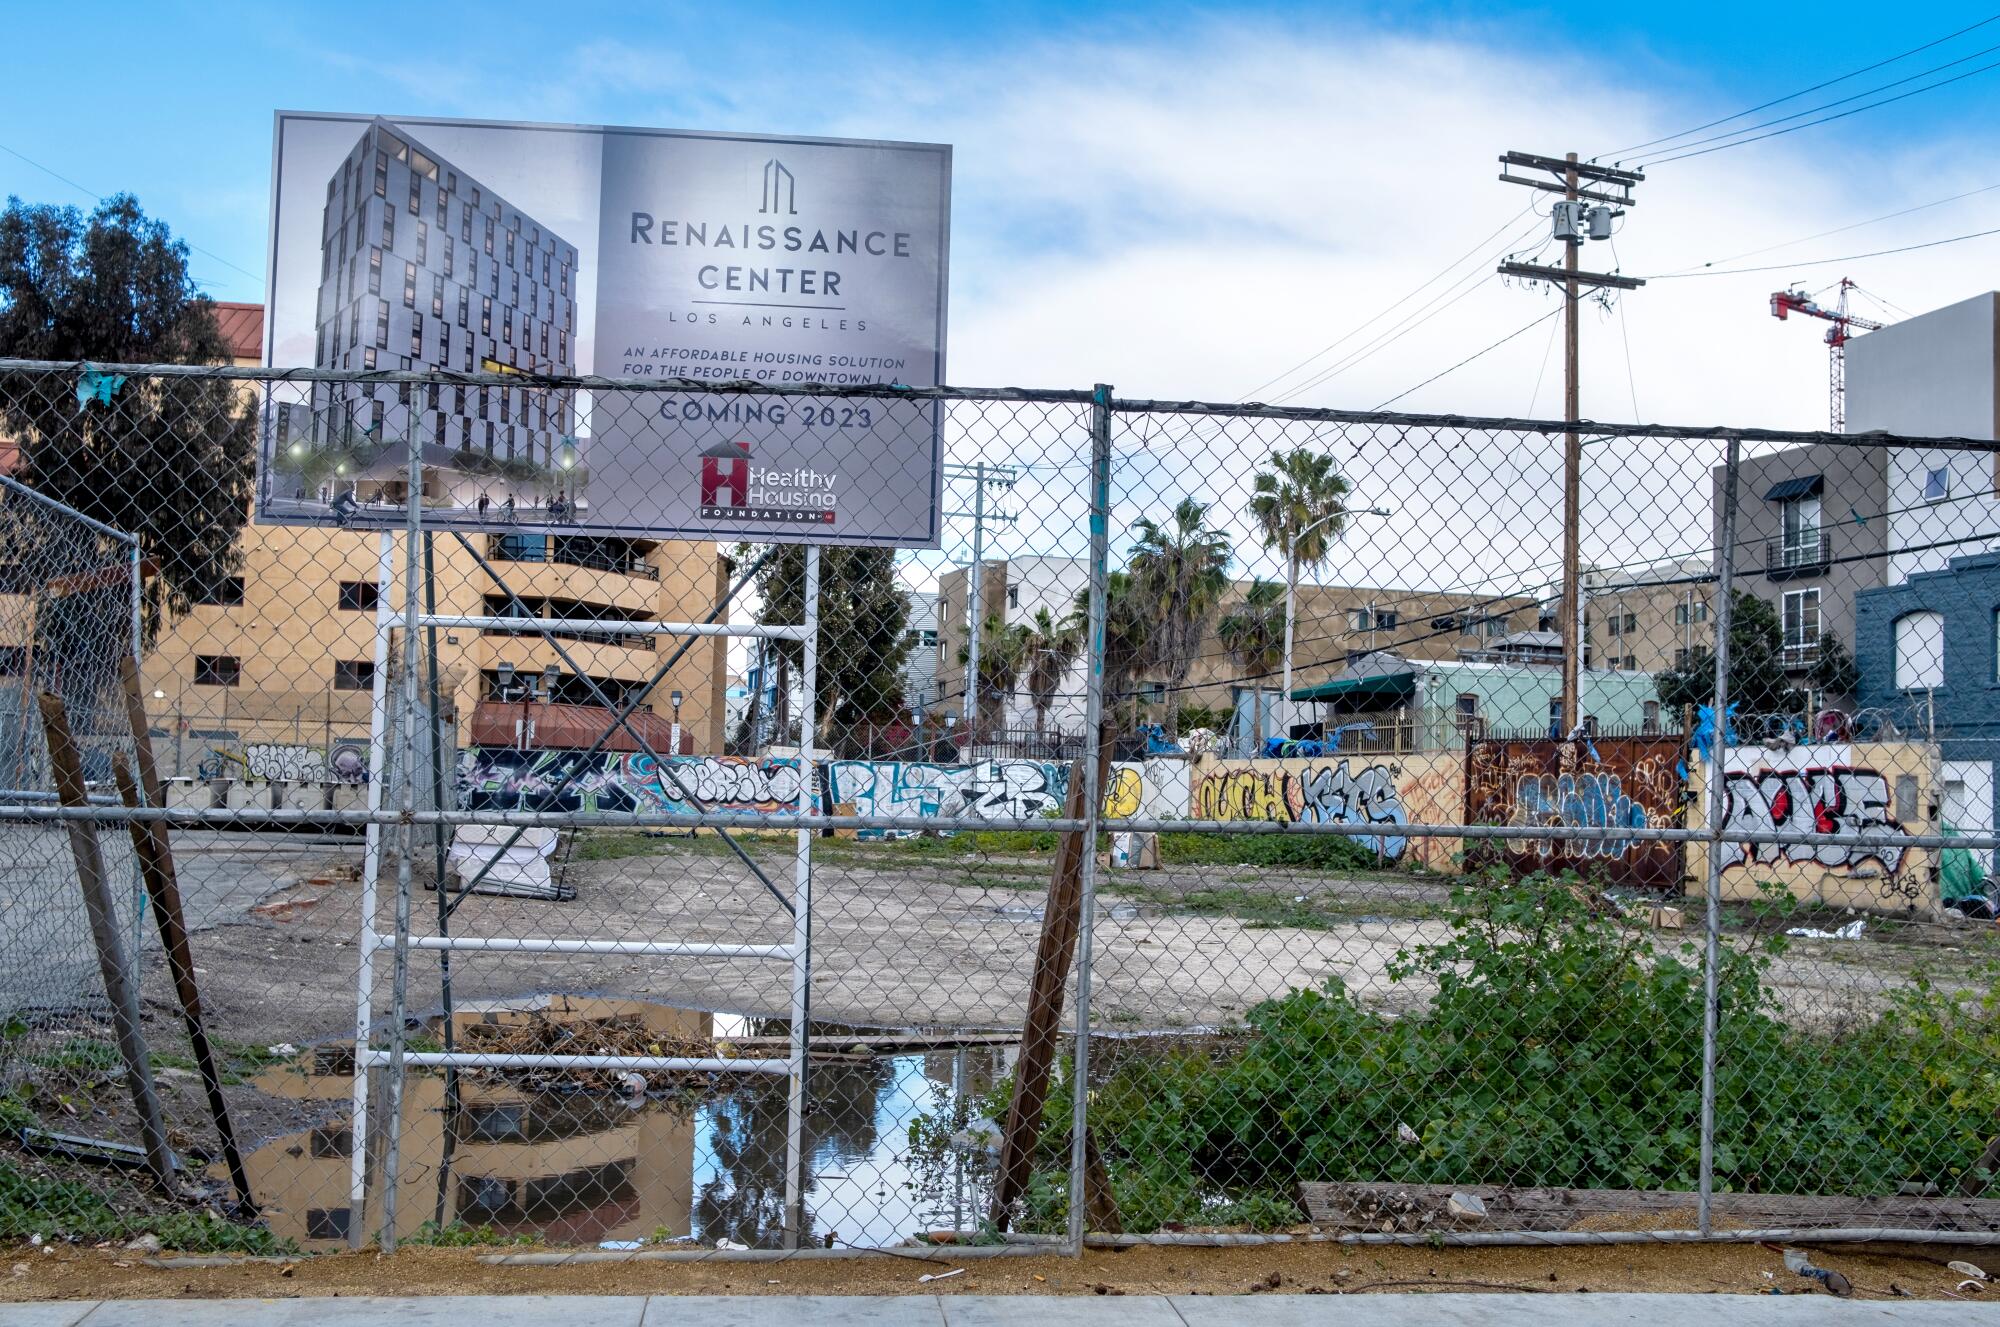 An empty lot behind a chainlink fence. Sign posted atop displays a grey modern building and title "Renaissance Center."